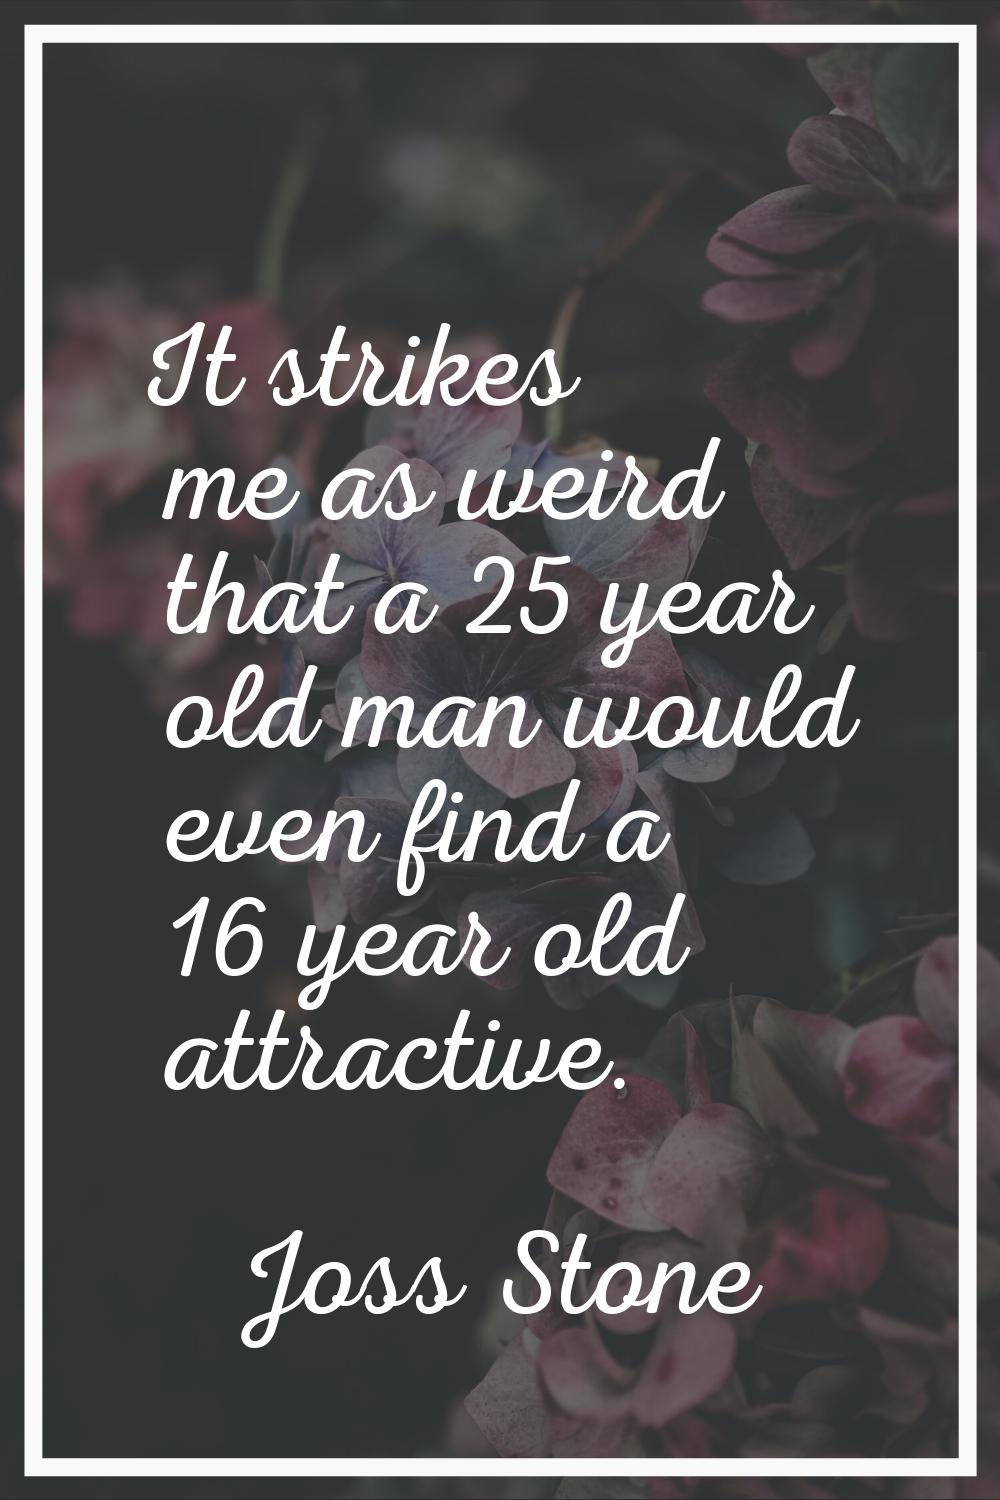 It strikes me as weird that a 25 year old man would even find a 16 year old attractive.